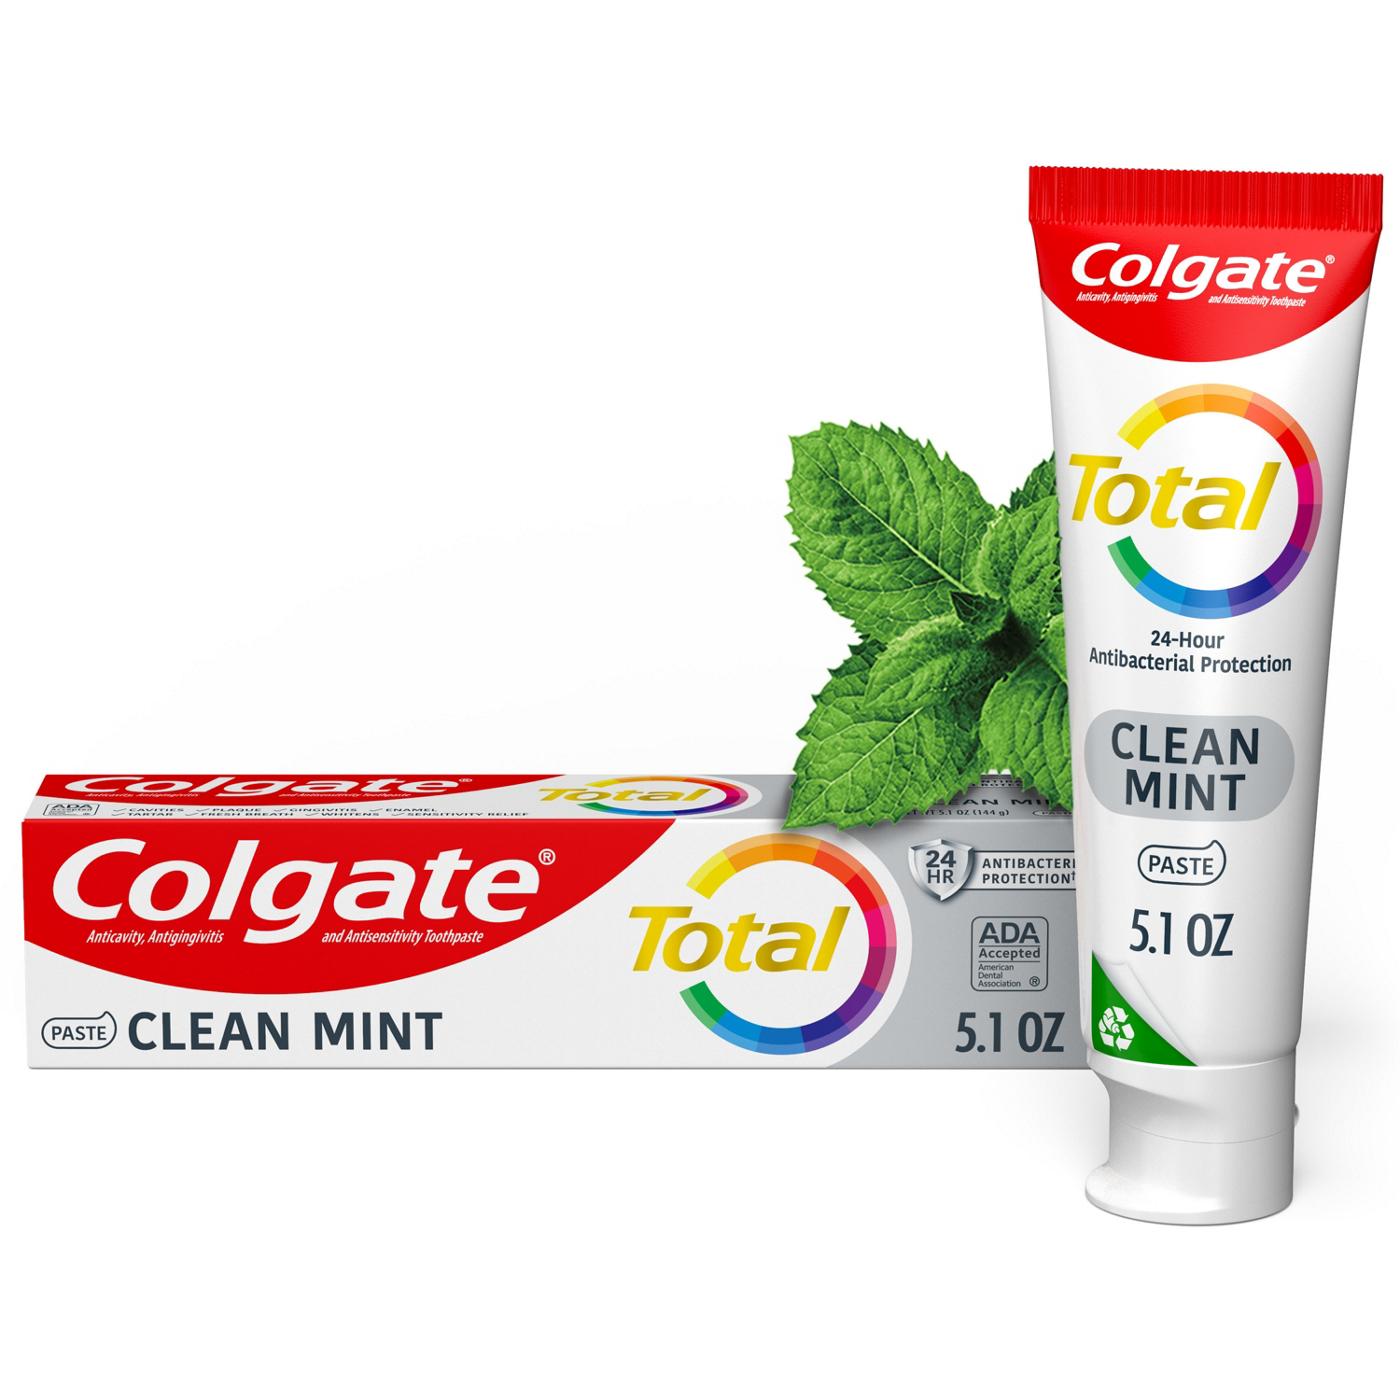 Colgate Total Toothpaste - Clean Mint; image 10 of 13